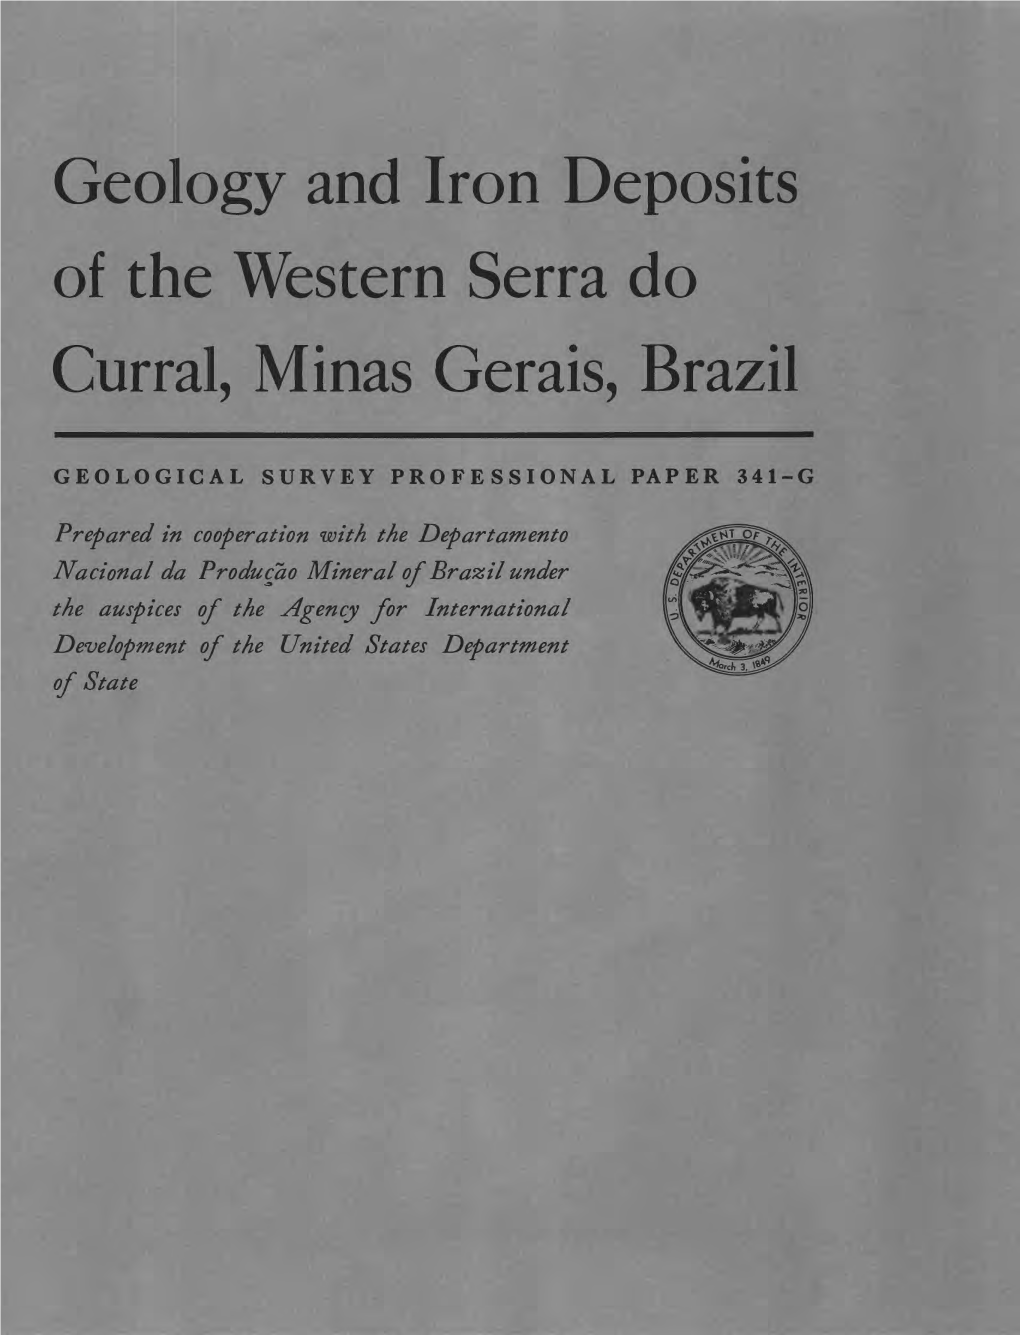 Geology and Iron Deposits of the Western Serra Do Curral, Minas Gerais, Brazil